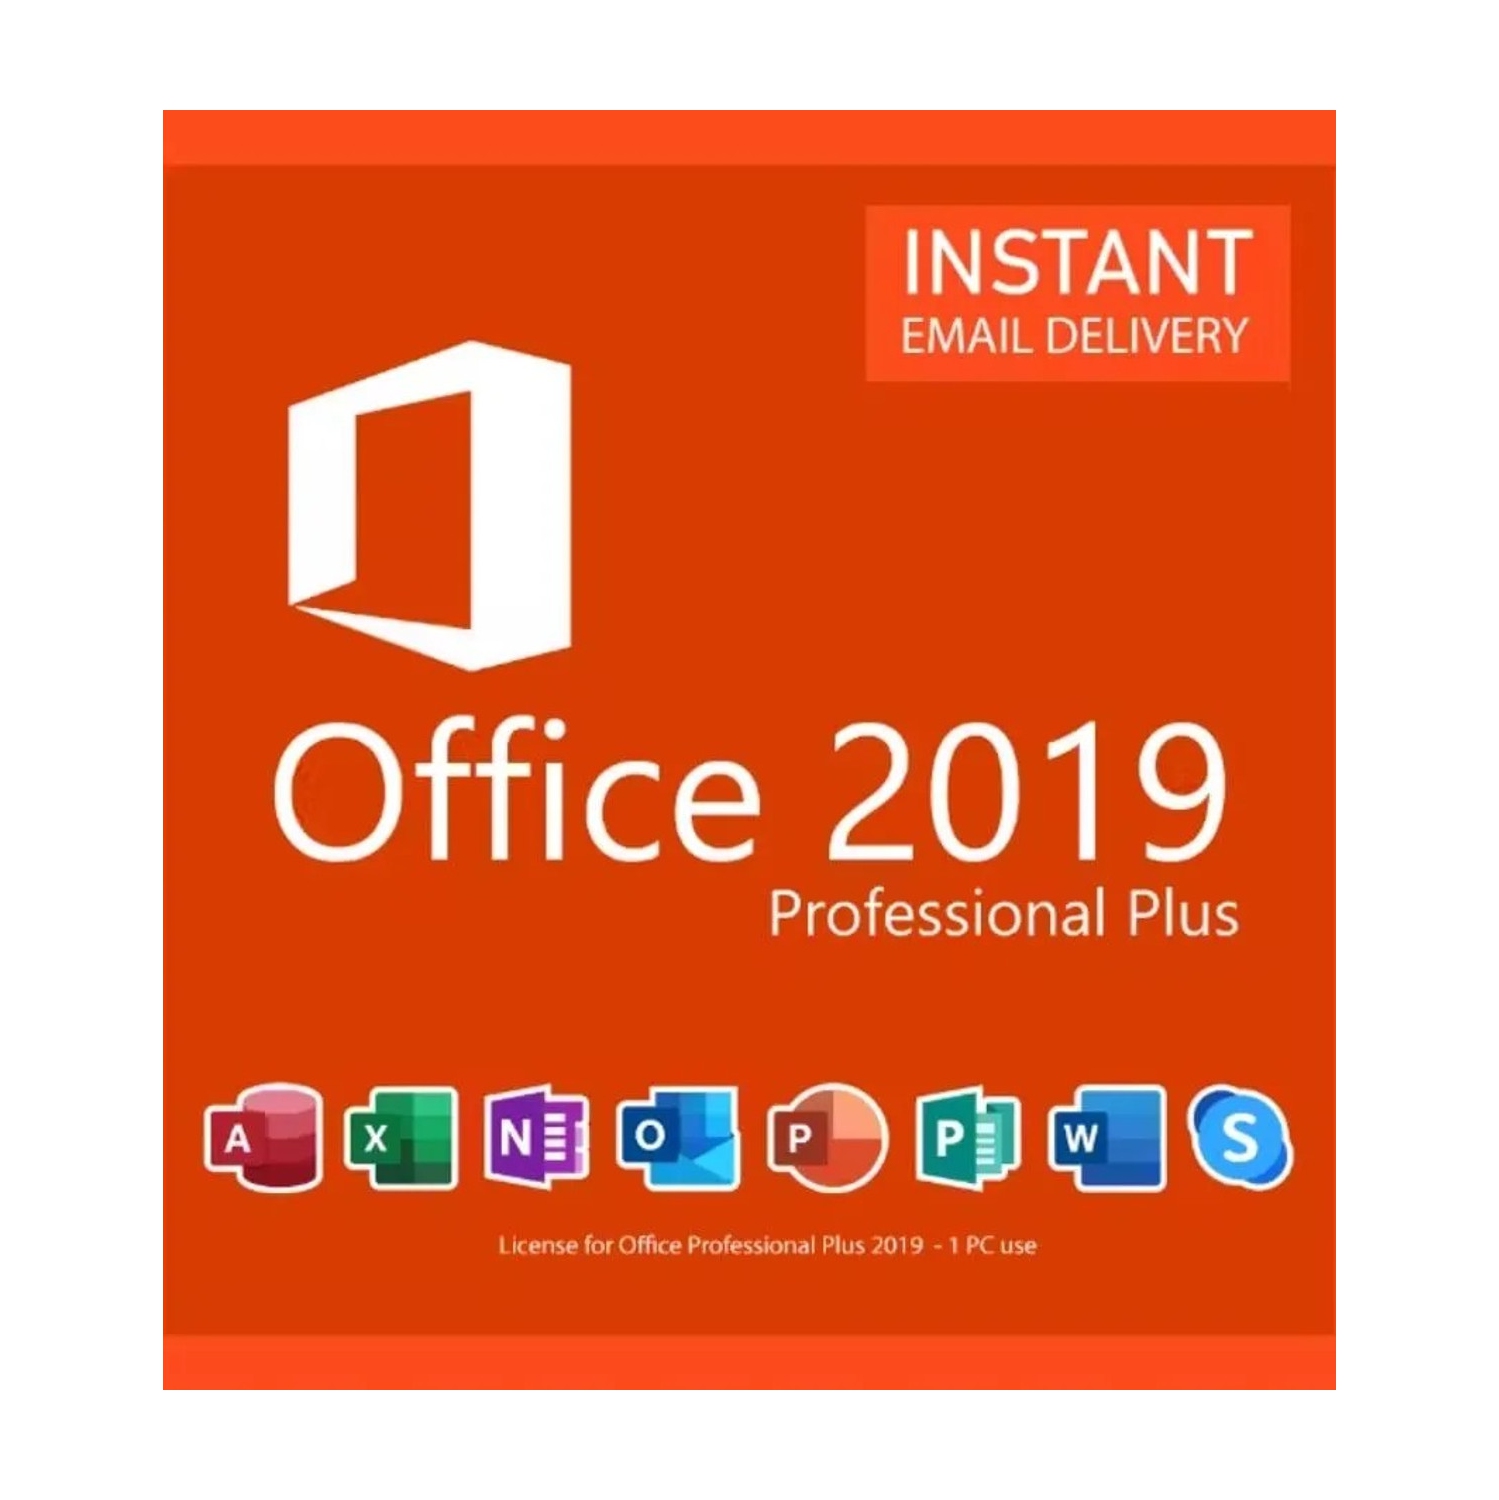 Microsoft Office Professional Plus 2019 for Windows: One-Time Purchase (Lifetime) - 1PC - Digital Download